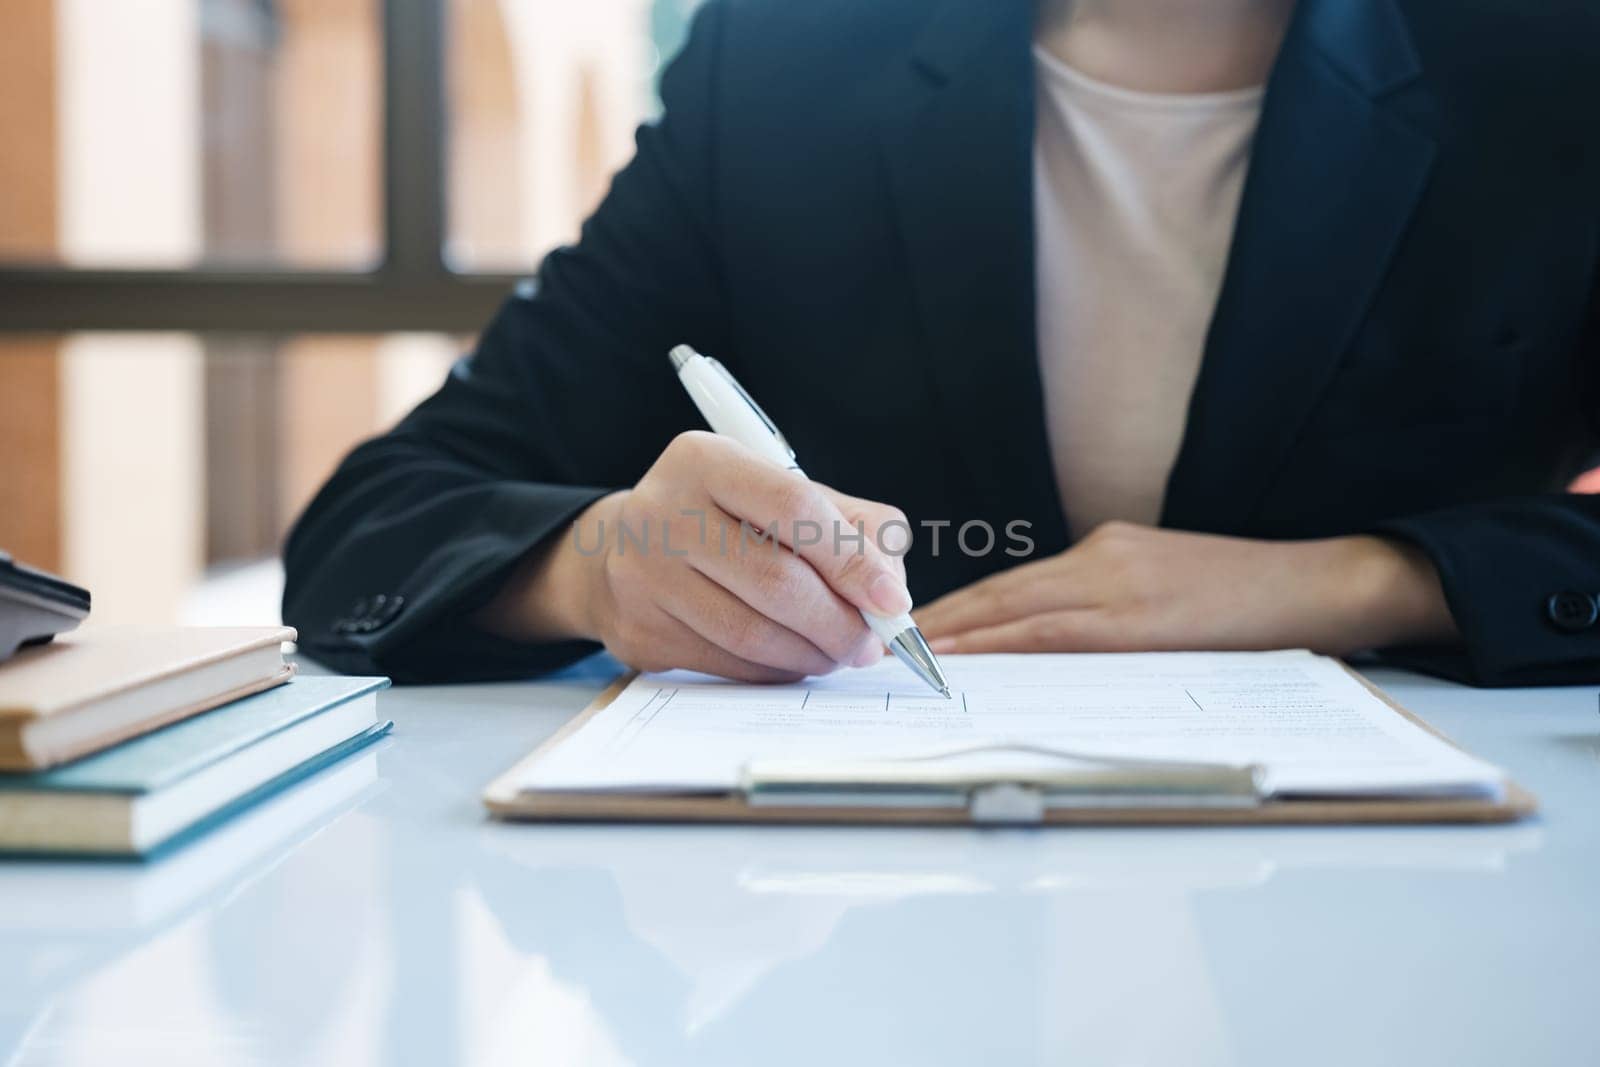 A woman in a suit is writing with a pen on a piece of paper by ijeab